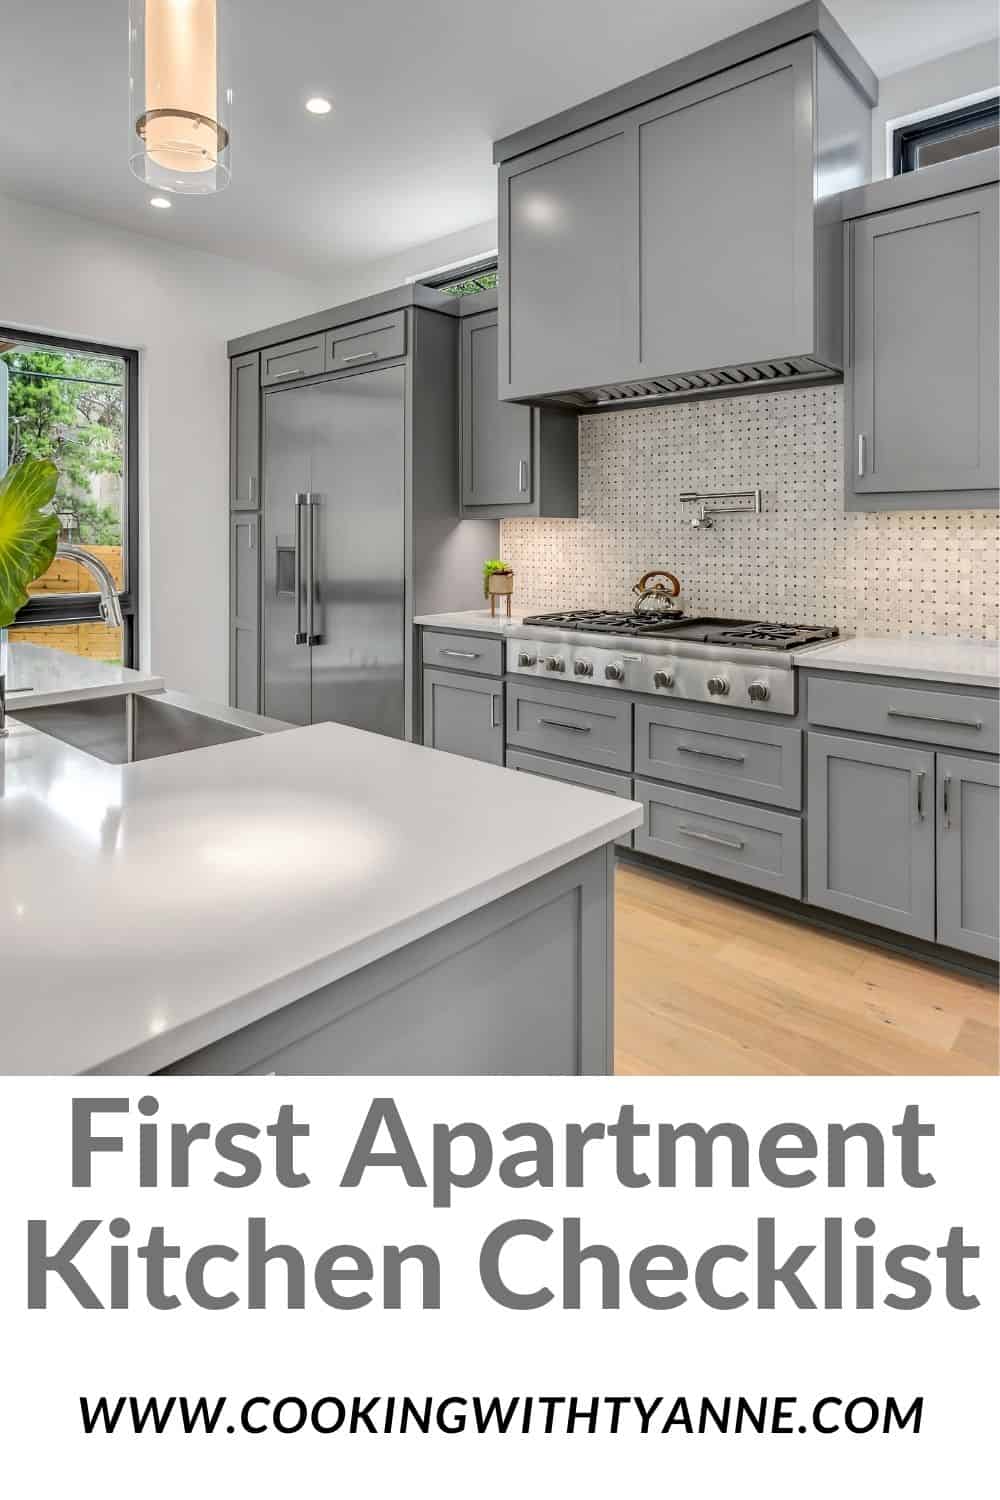 Kitchen List of Items for First Apartment- From a Recent College Grad